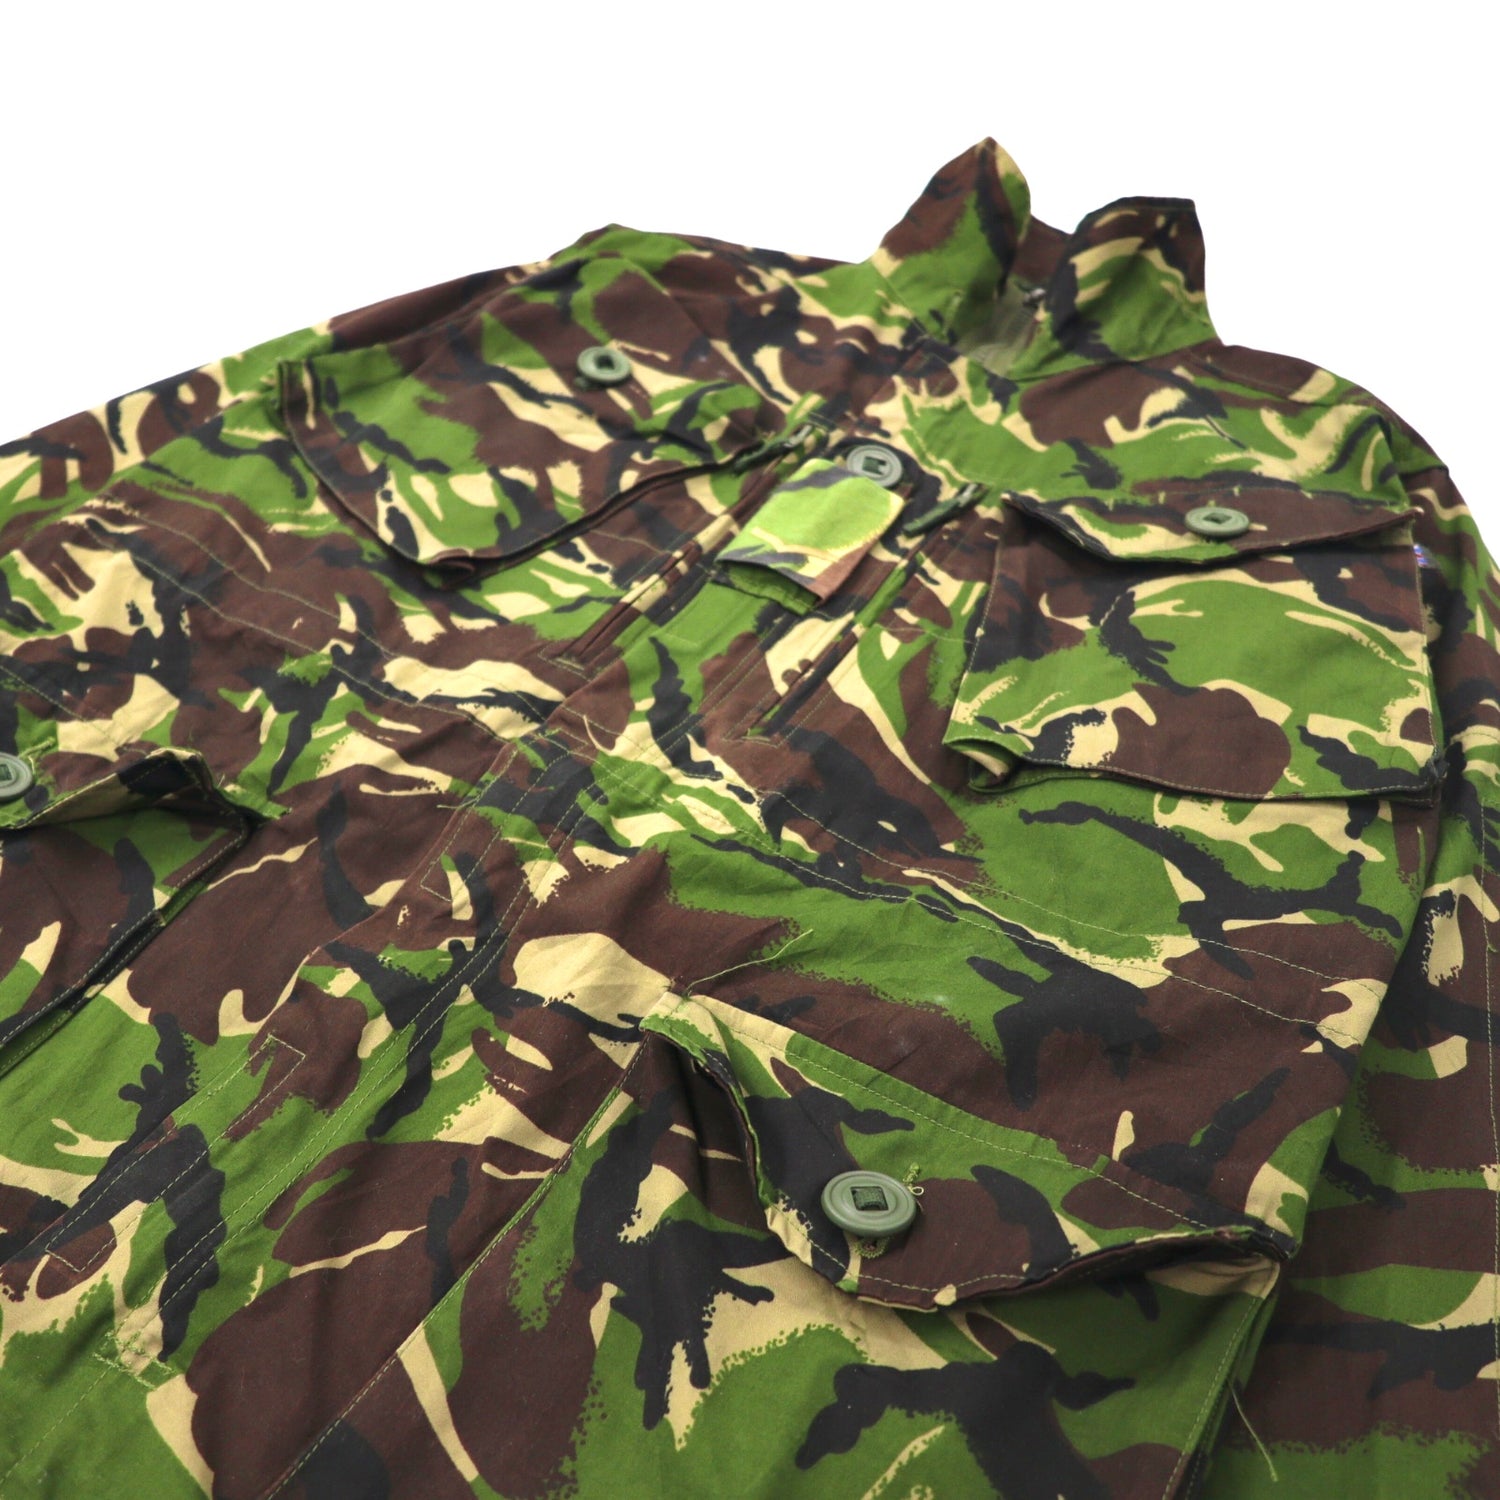 Field jacket 170/96 United Kingdom army 90's Camouflage patterned 